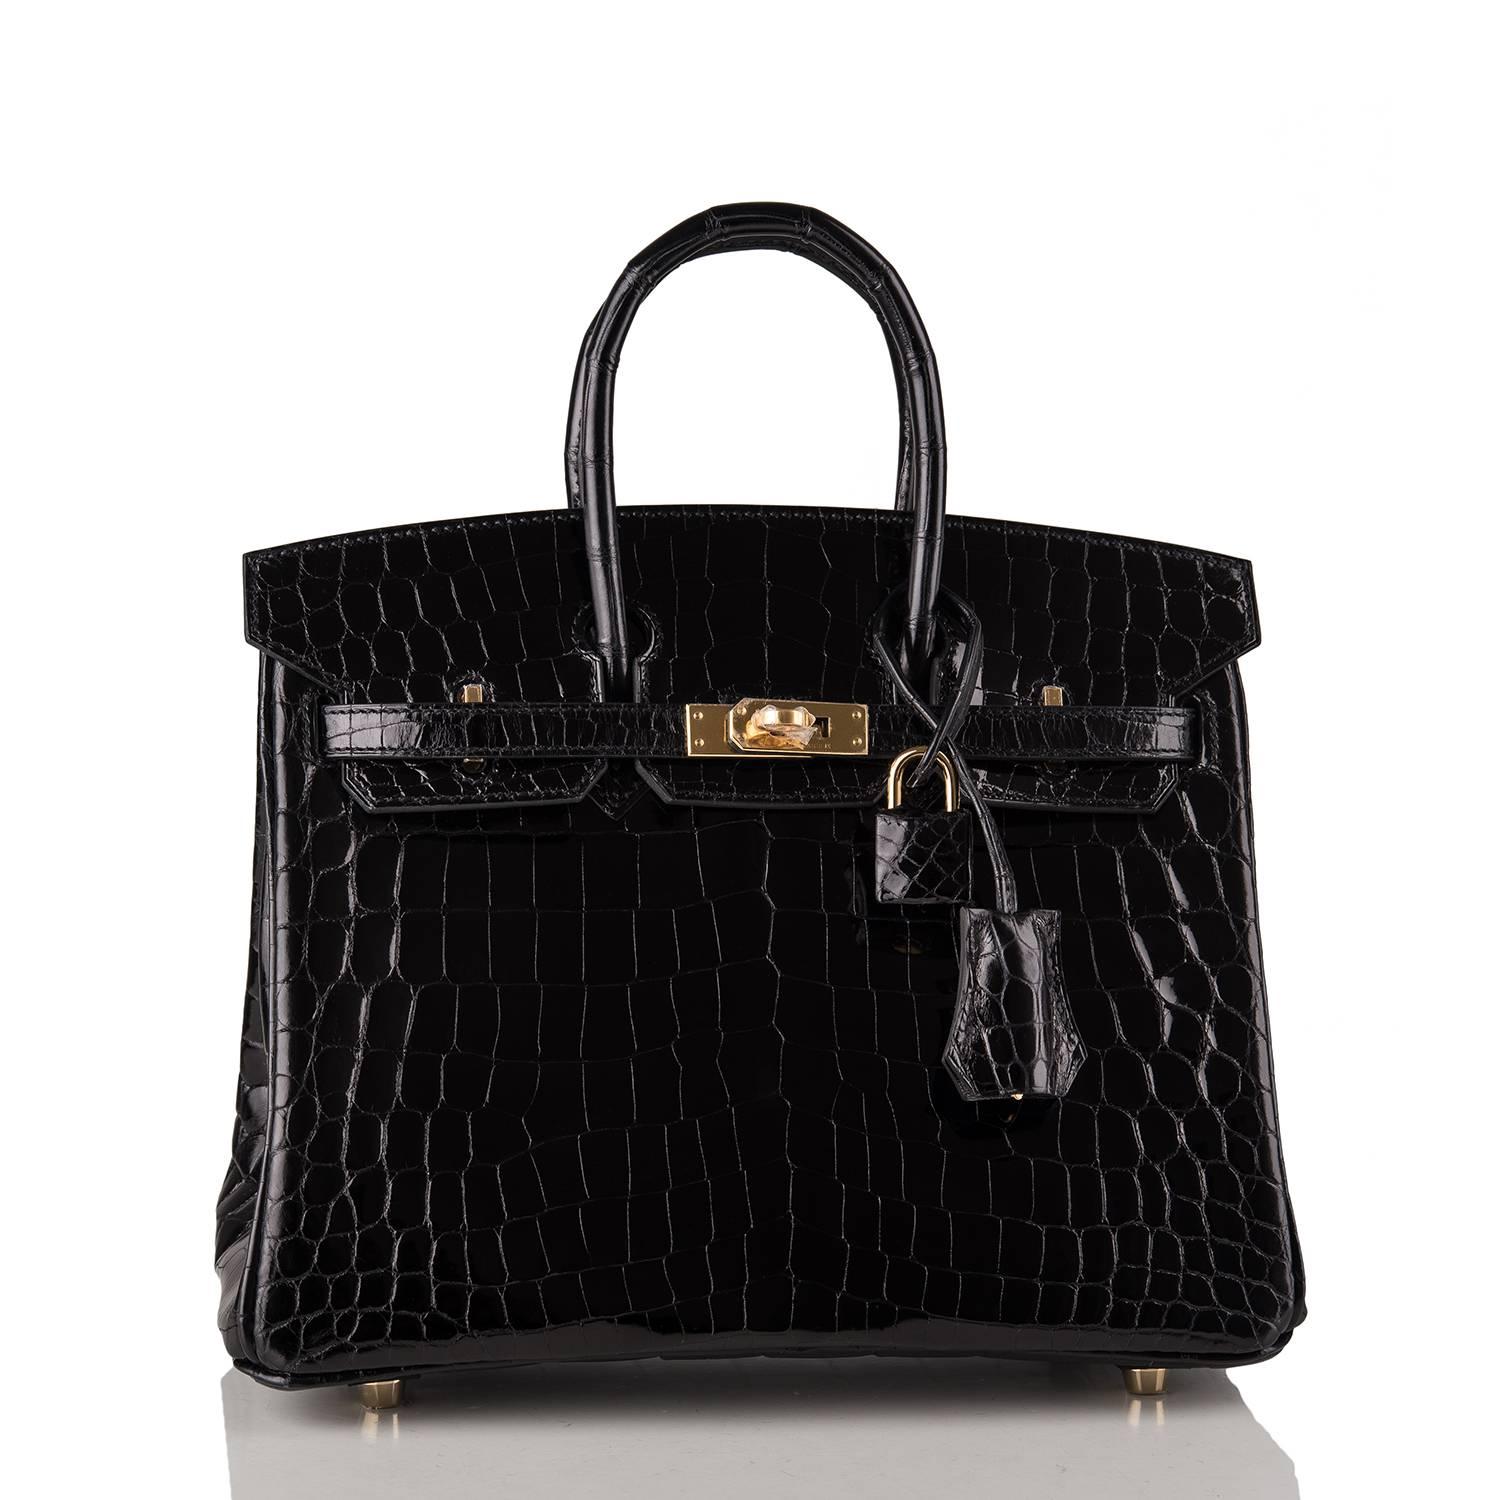 Hermes Black Birkin 25cm of shiny Niloticus crocodile with gold hardware.

This Birkin has tonal stitching, a front toggle closure, a clochette with lock and two keys, and double rolled handles.

The interior is lined with Black chevre and has one